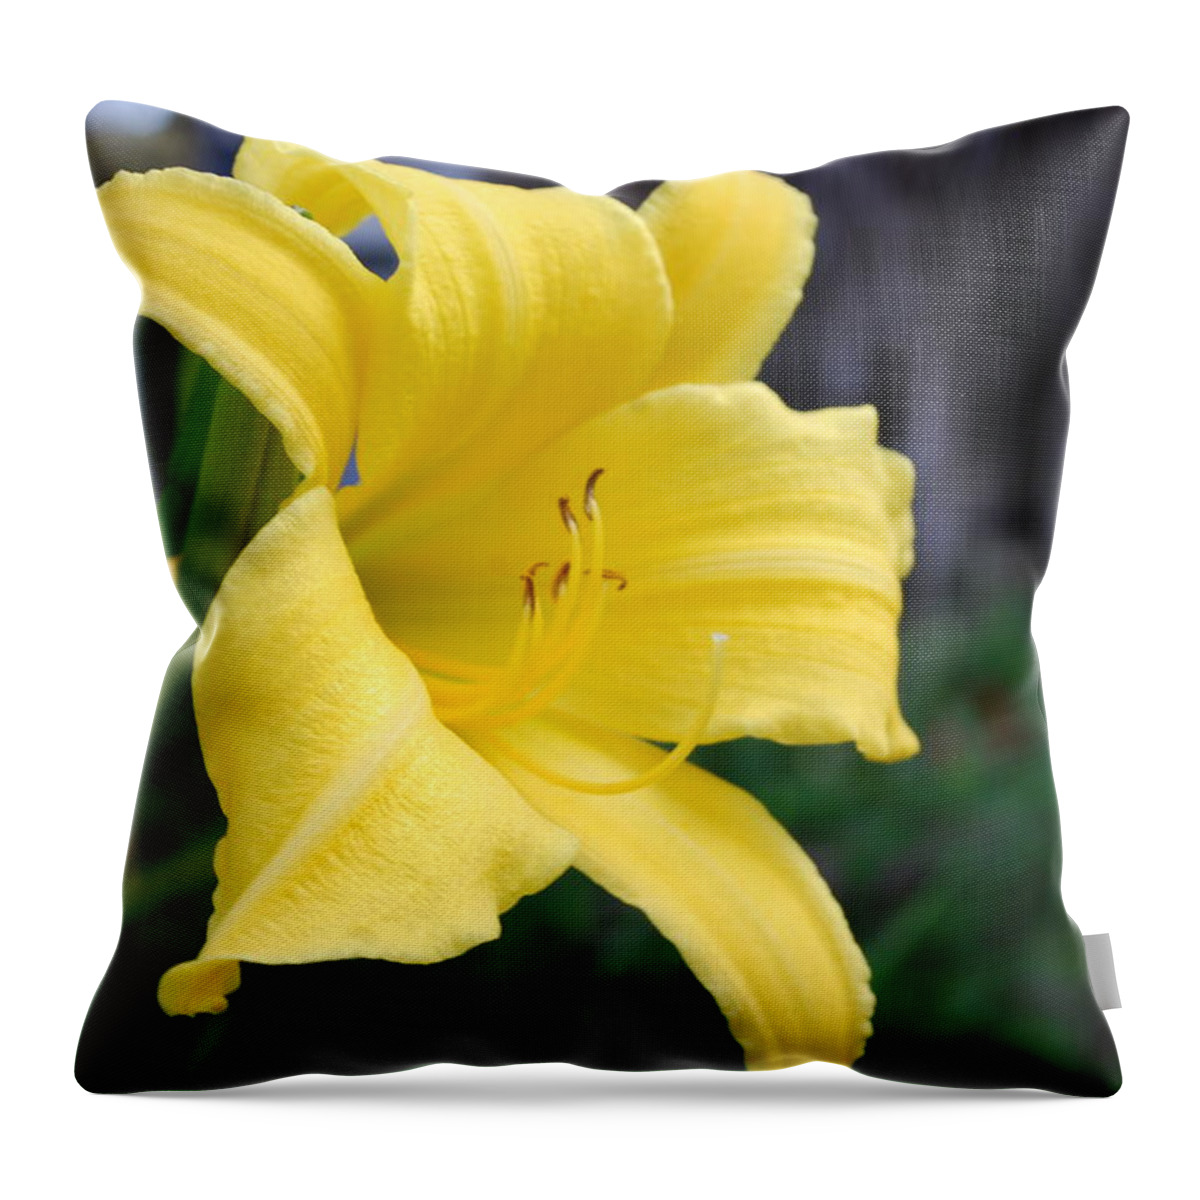 Tree Green Field Throw Pillow featuring the photograph Amanecer by Rebeca Segura